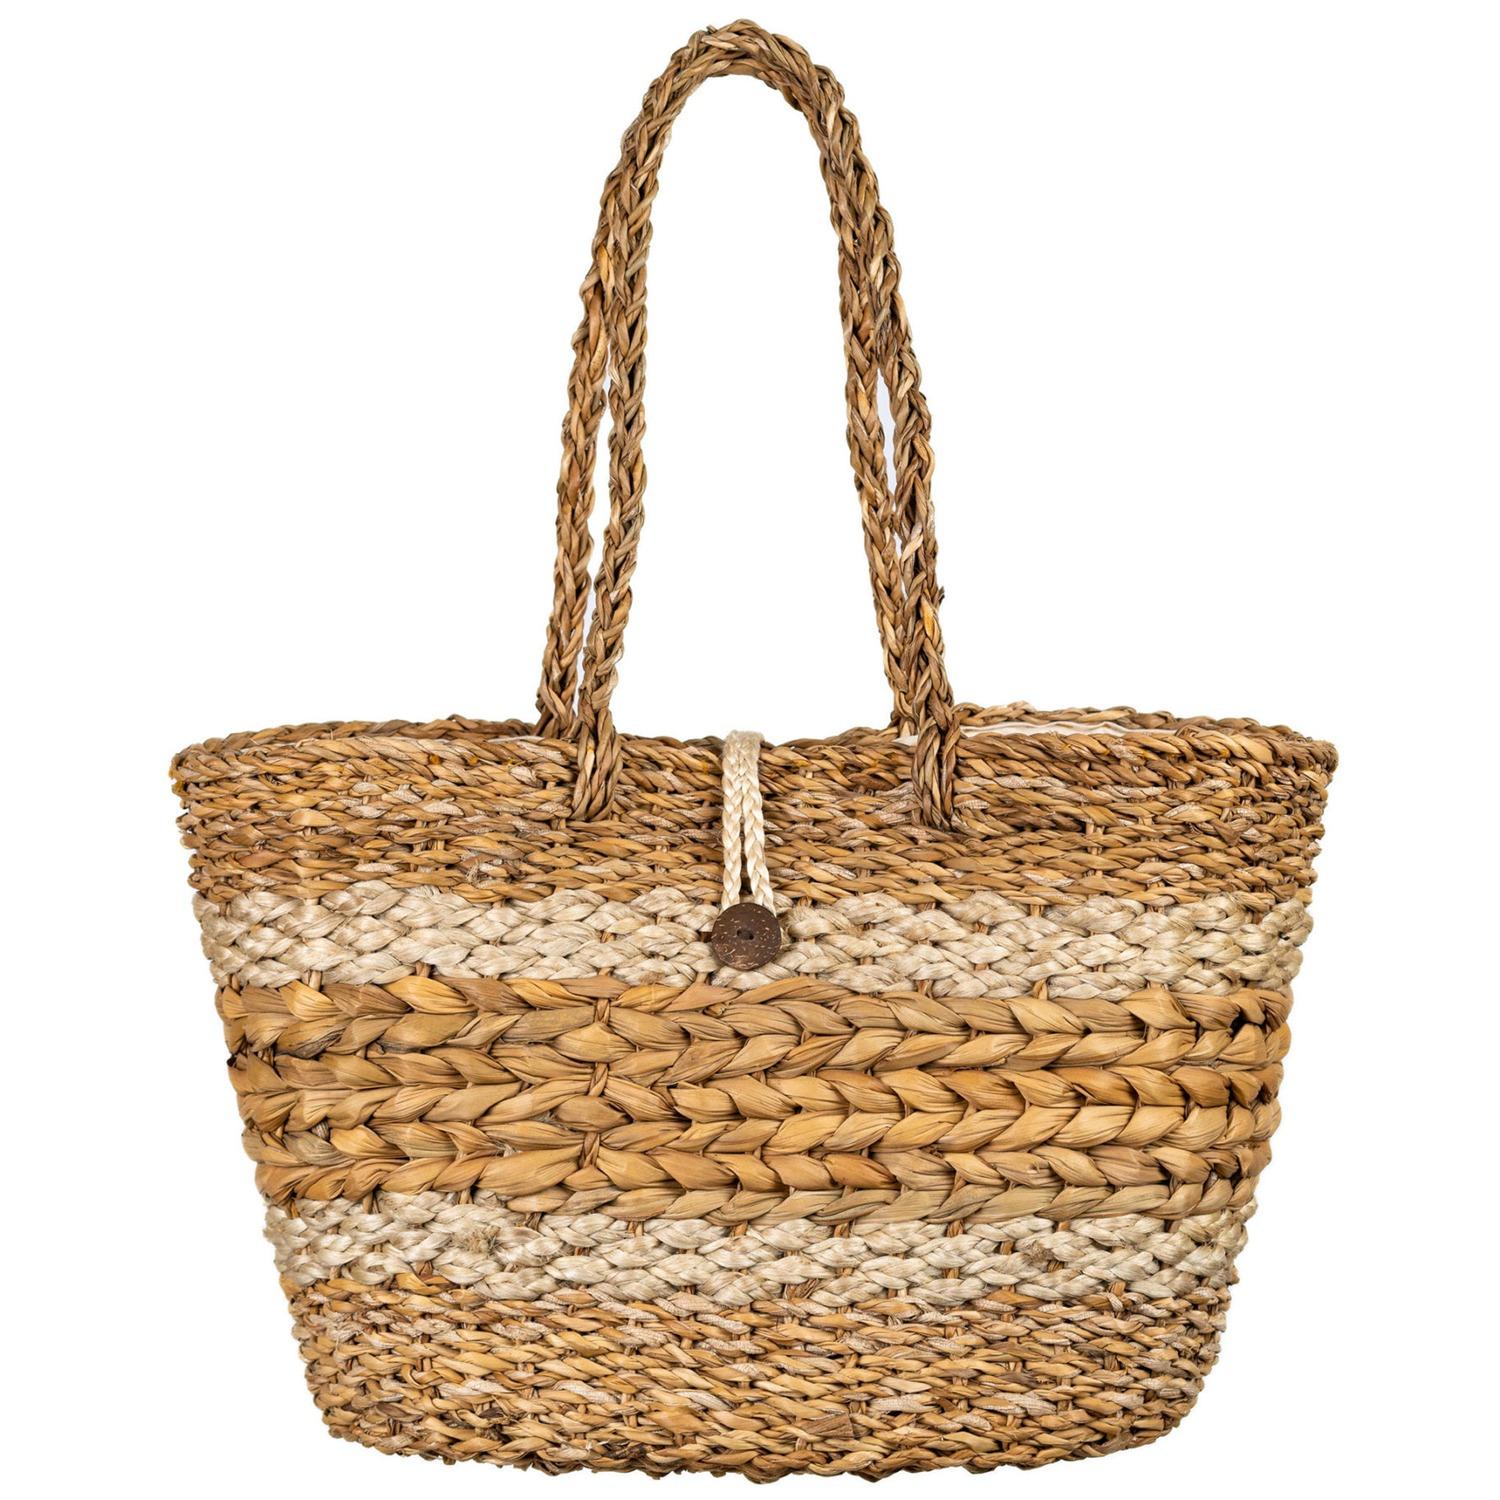 stripped seagrass basket by turtle bags